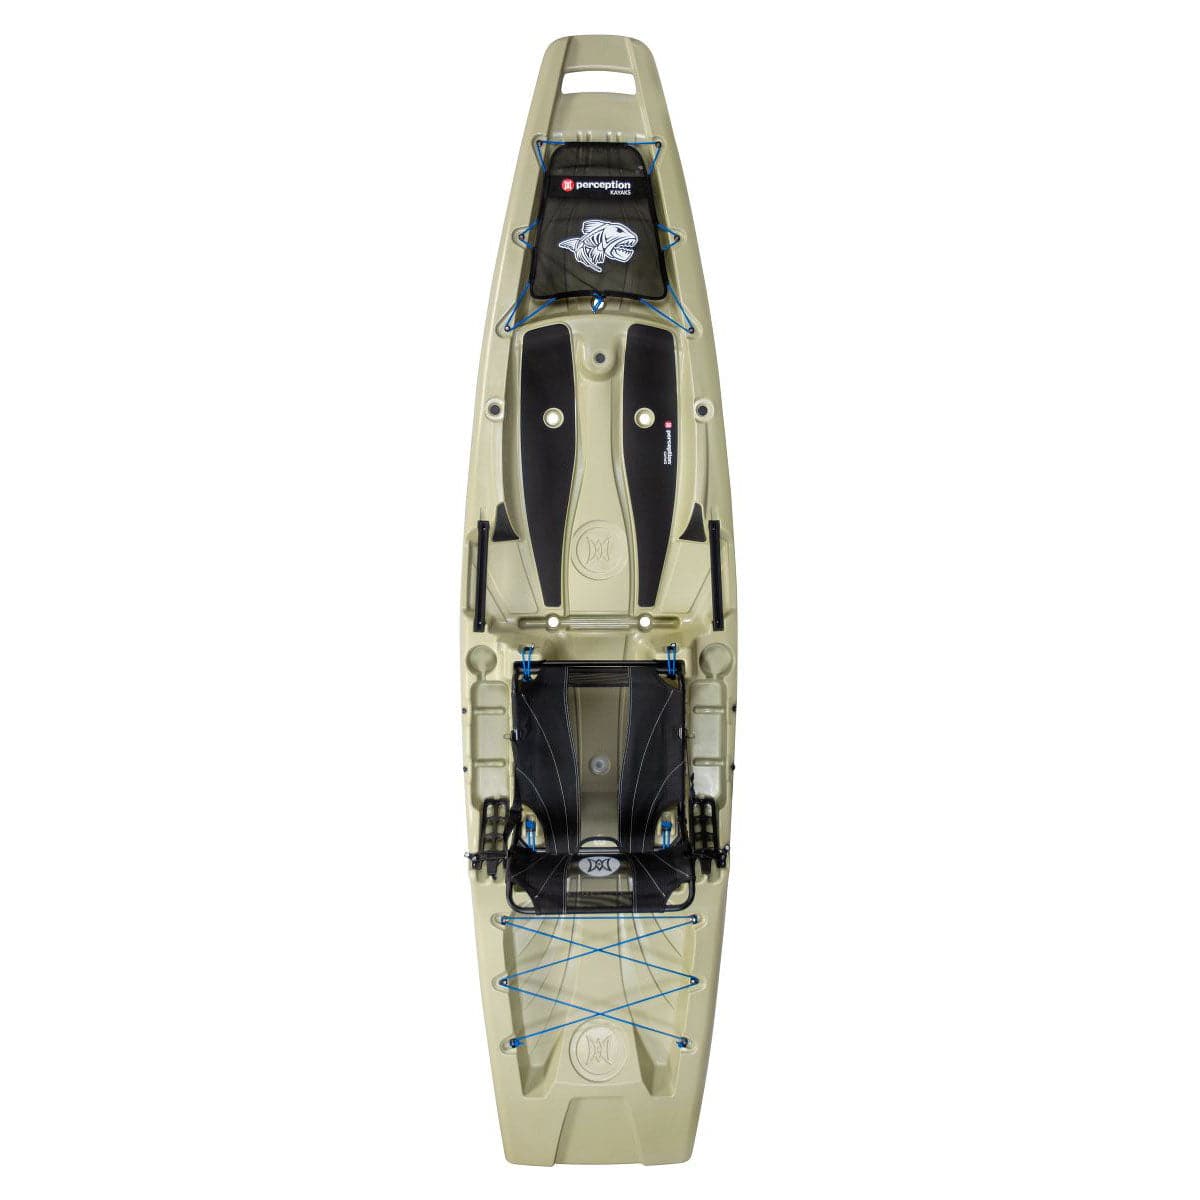 Featuring the Outlaw 11.5 fishing kayak, sit-on-top rec / touring kayak manufactured by Perception shown here from one angle.